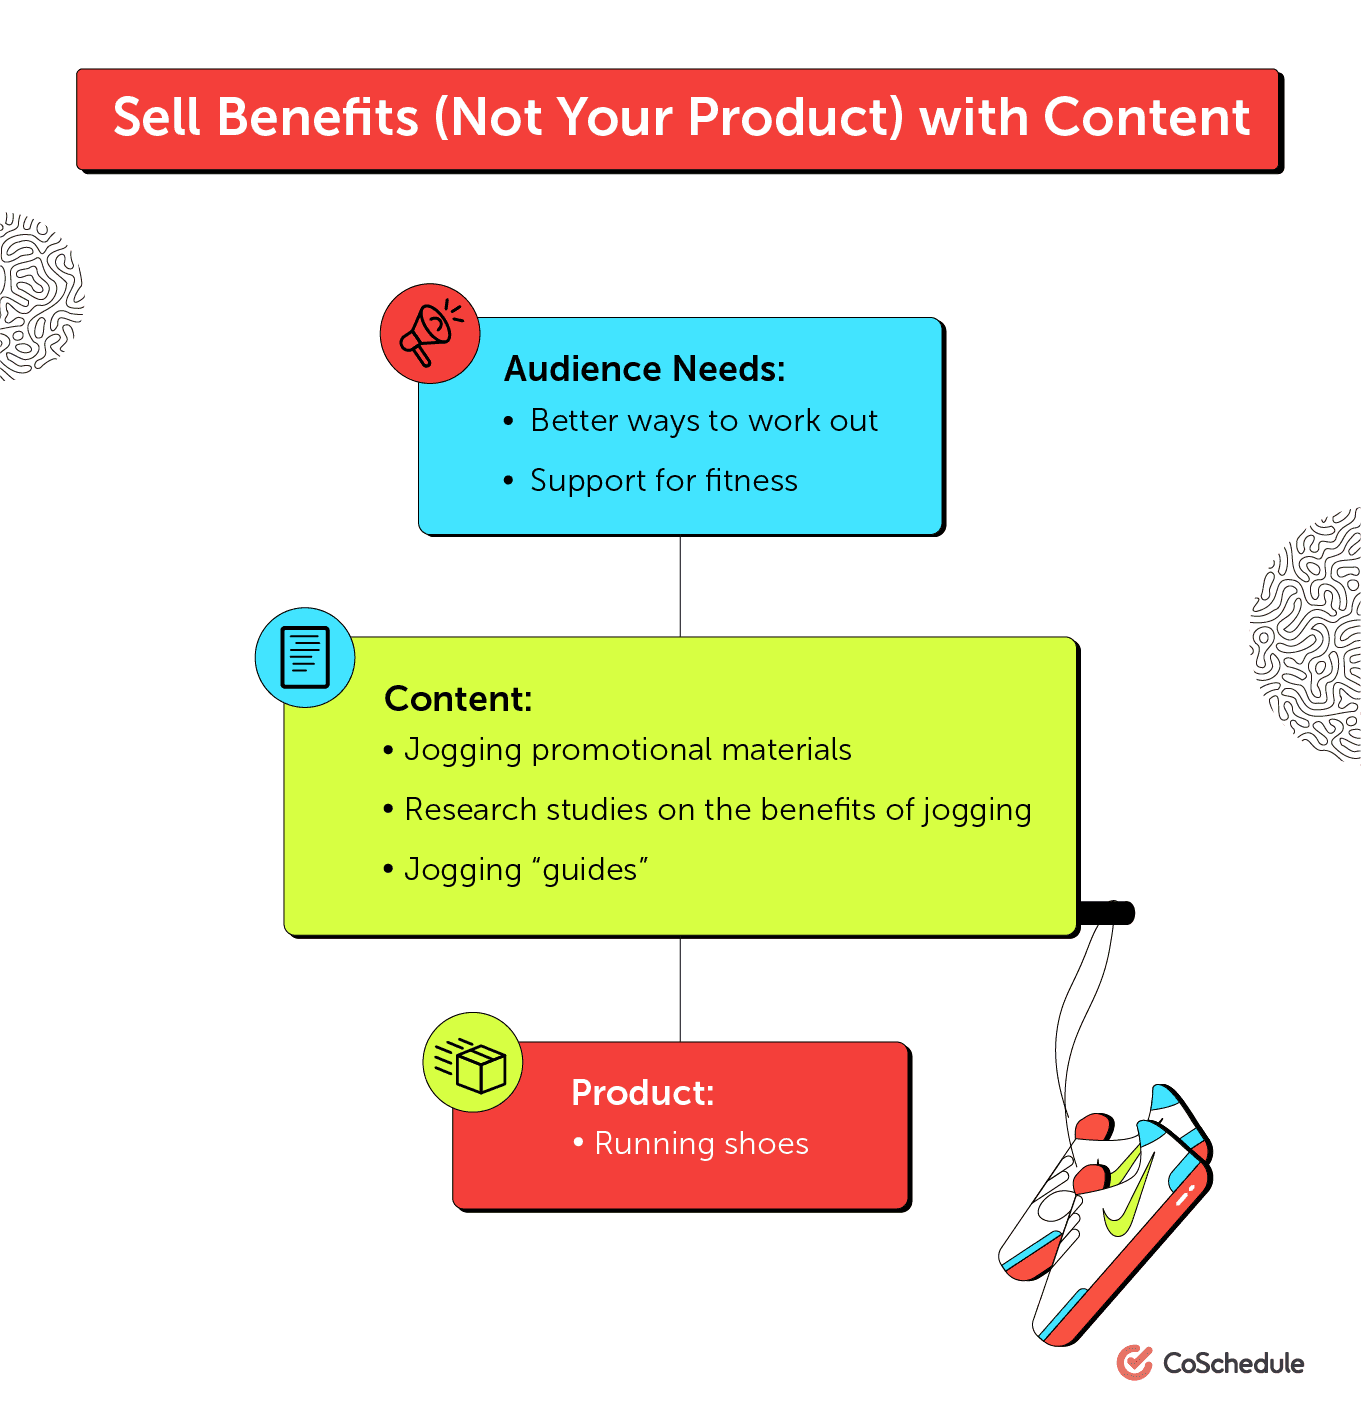 Example of selling benefits rather than product with your content